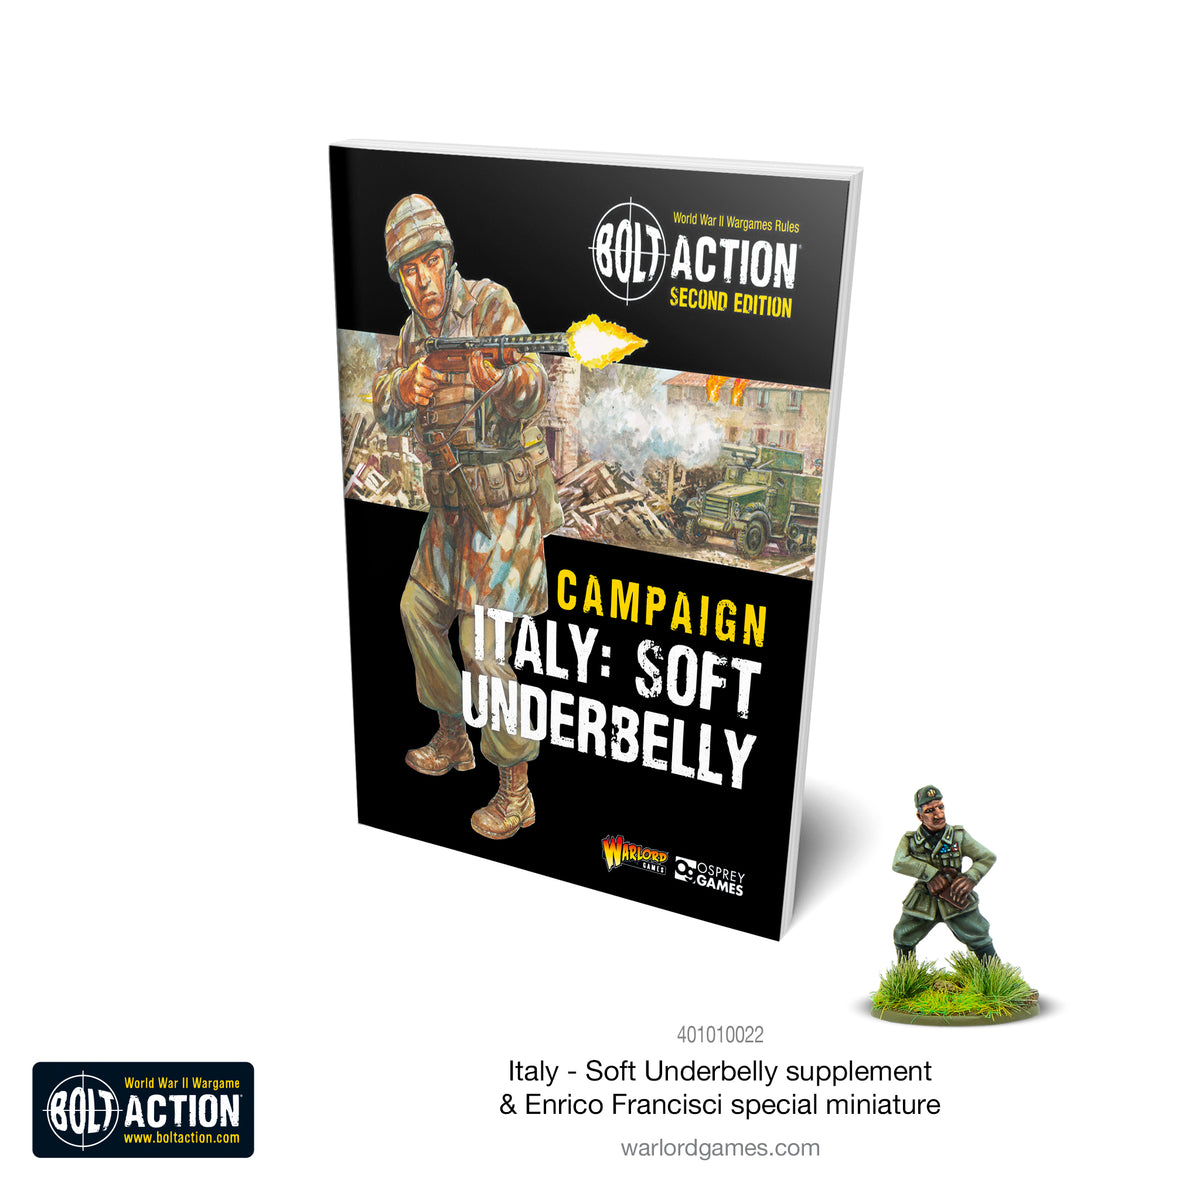 Italy: Soft Underbelly (Bolt Action campaign book)